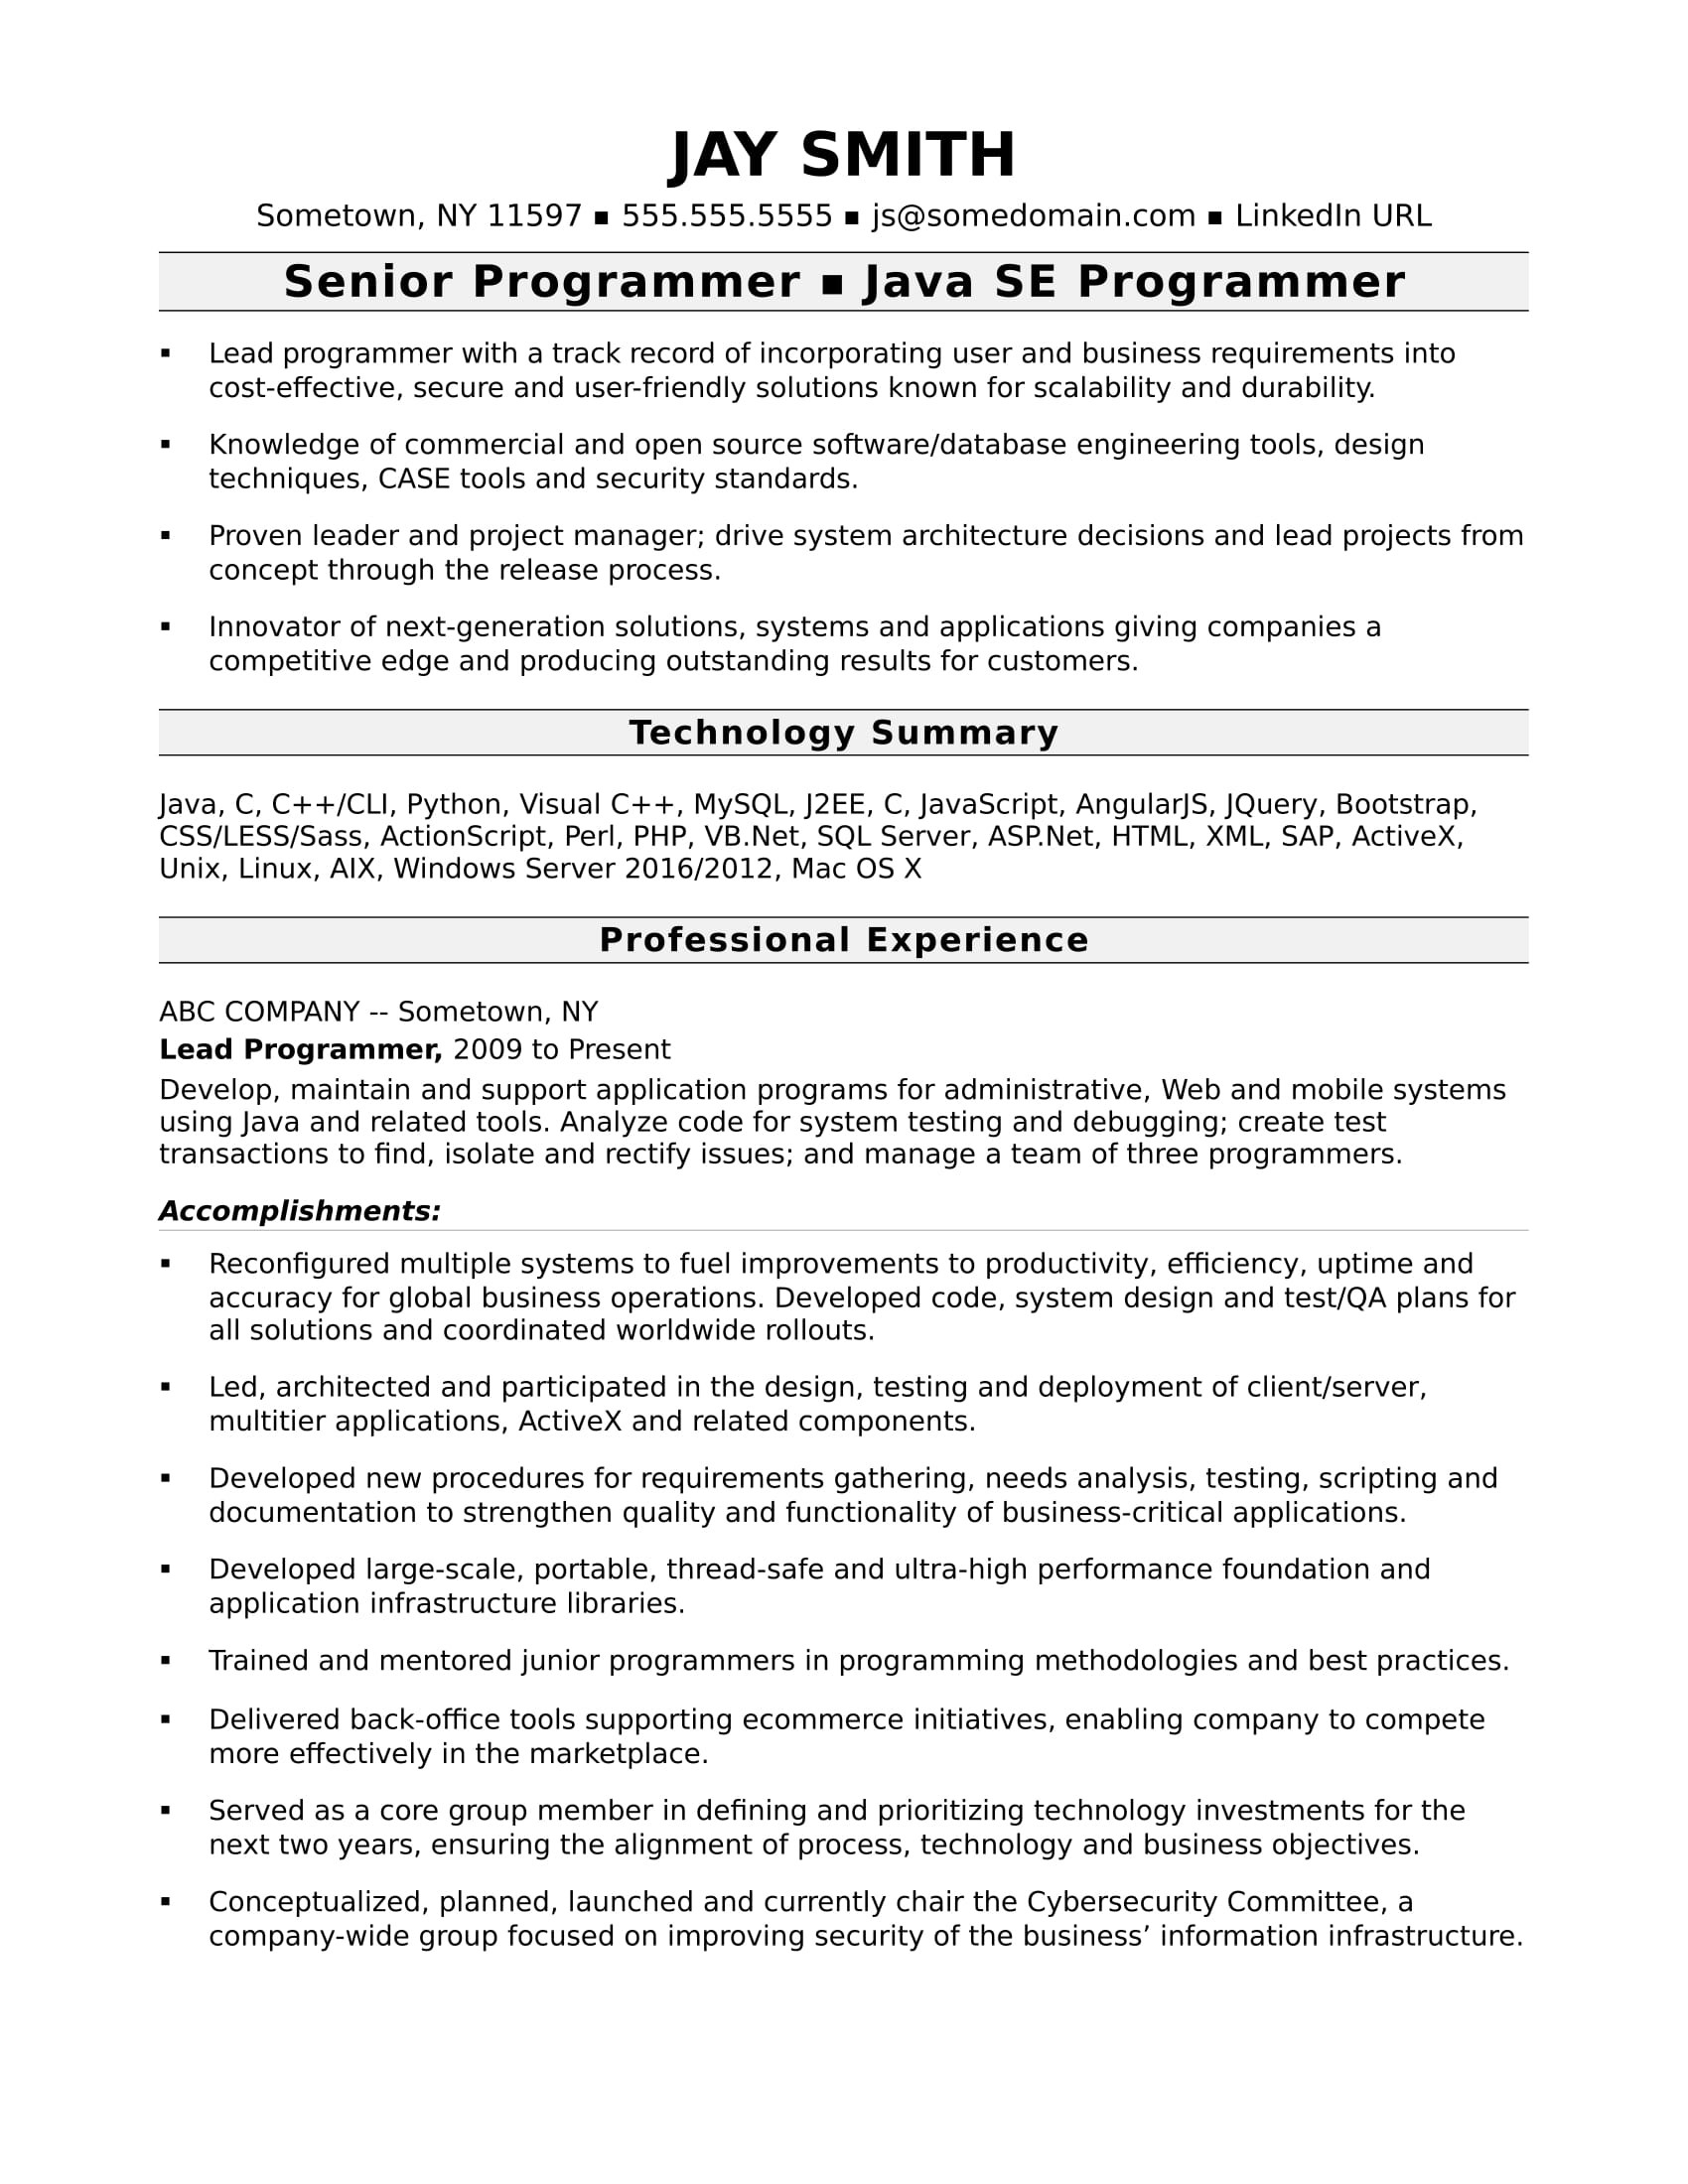 Sample Resume Duties Accomplishments and Related Skills Programmer Resume Template Monster.com